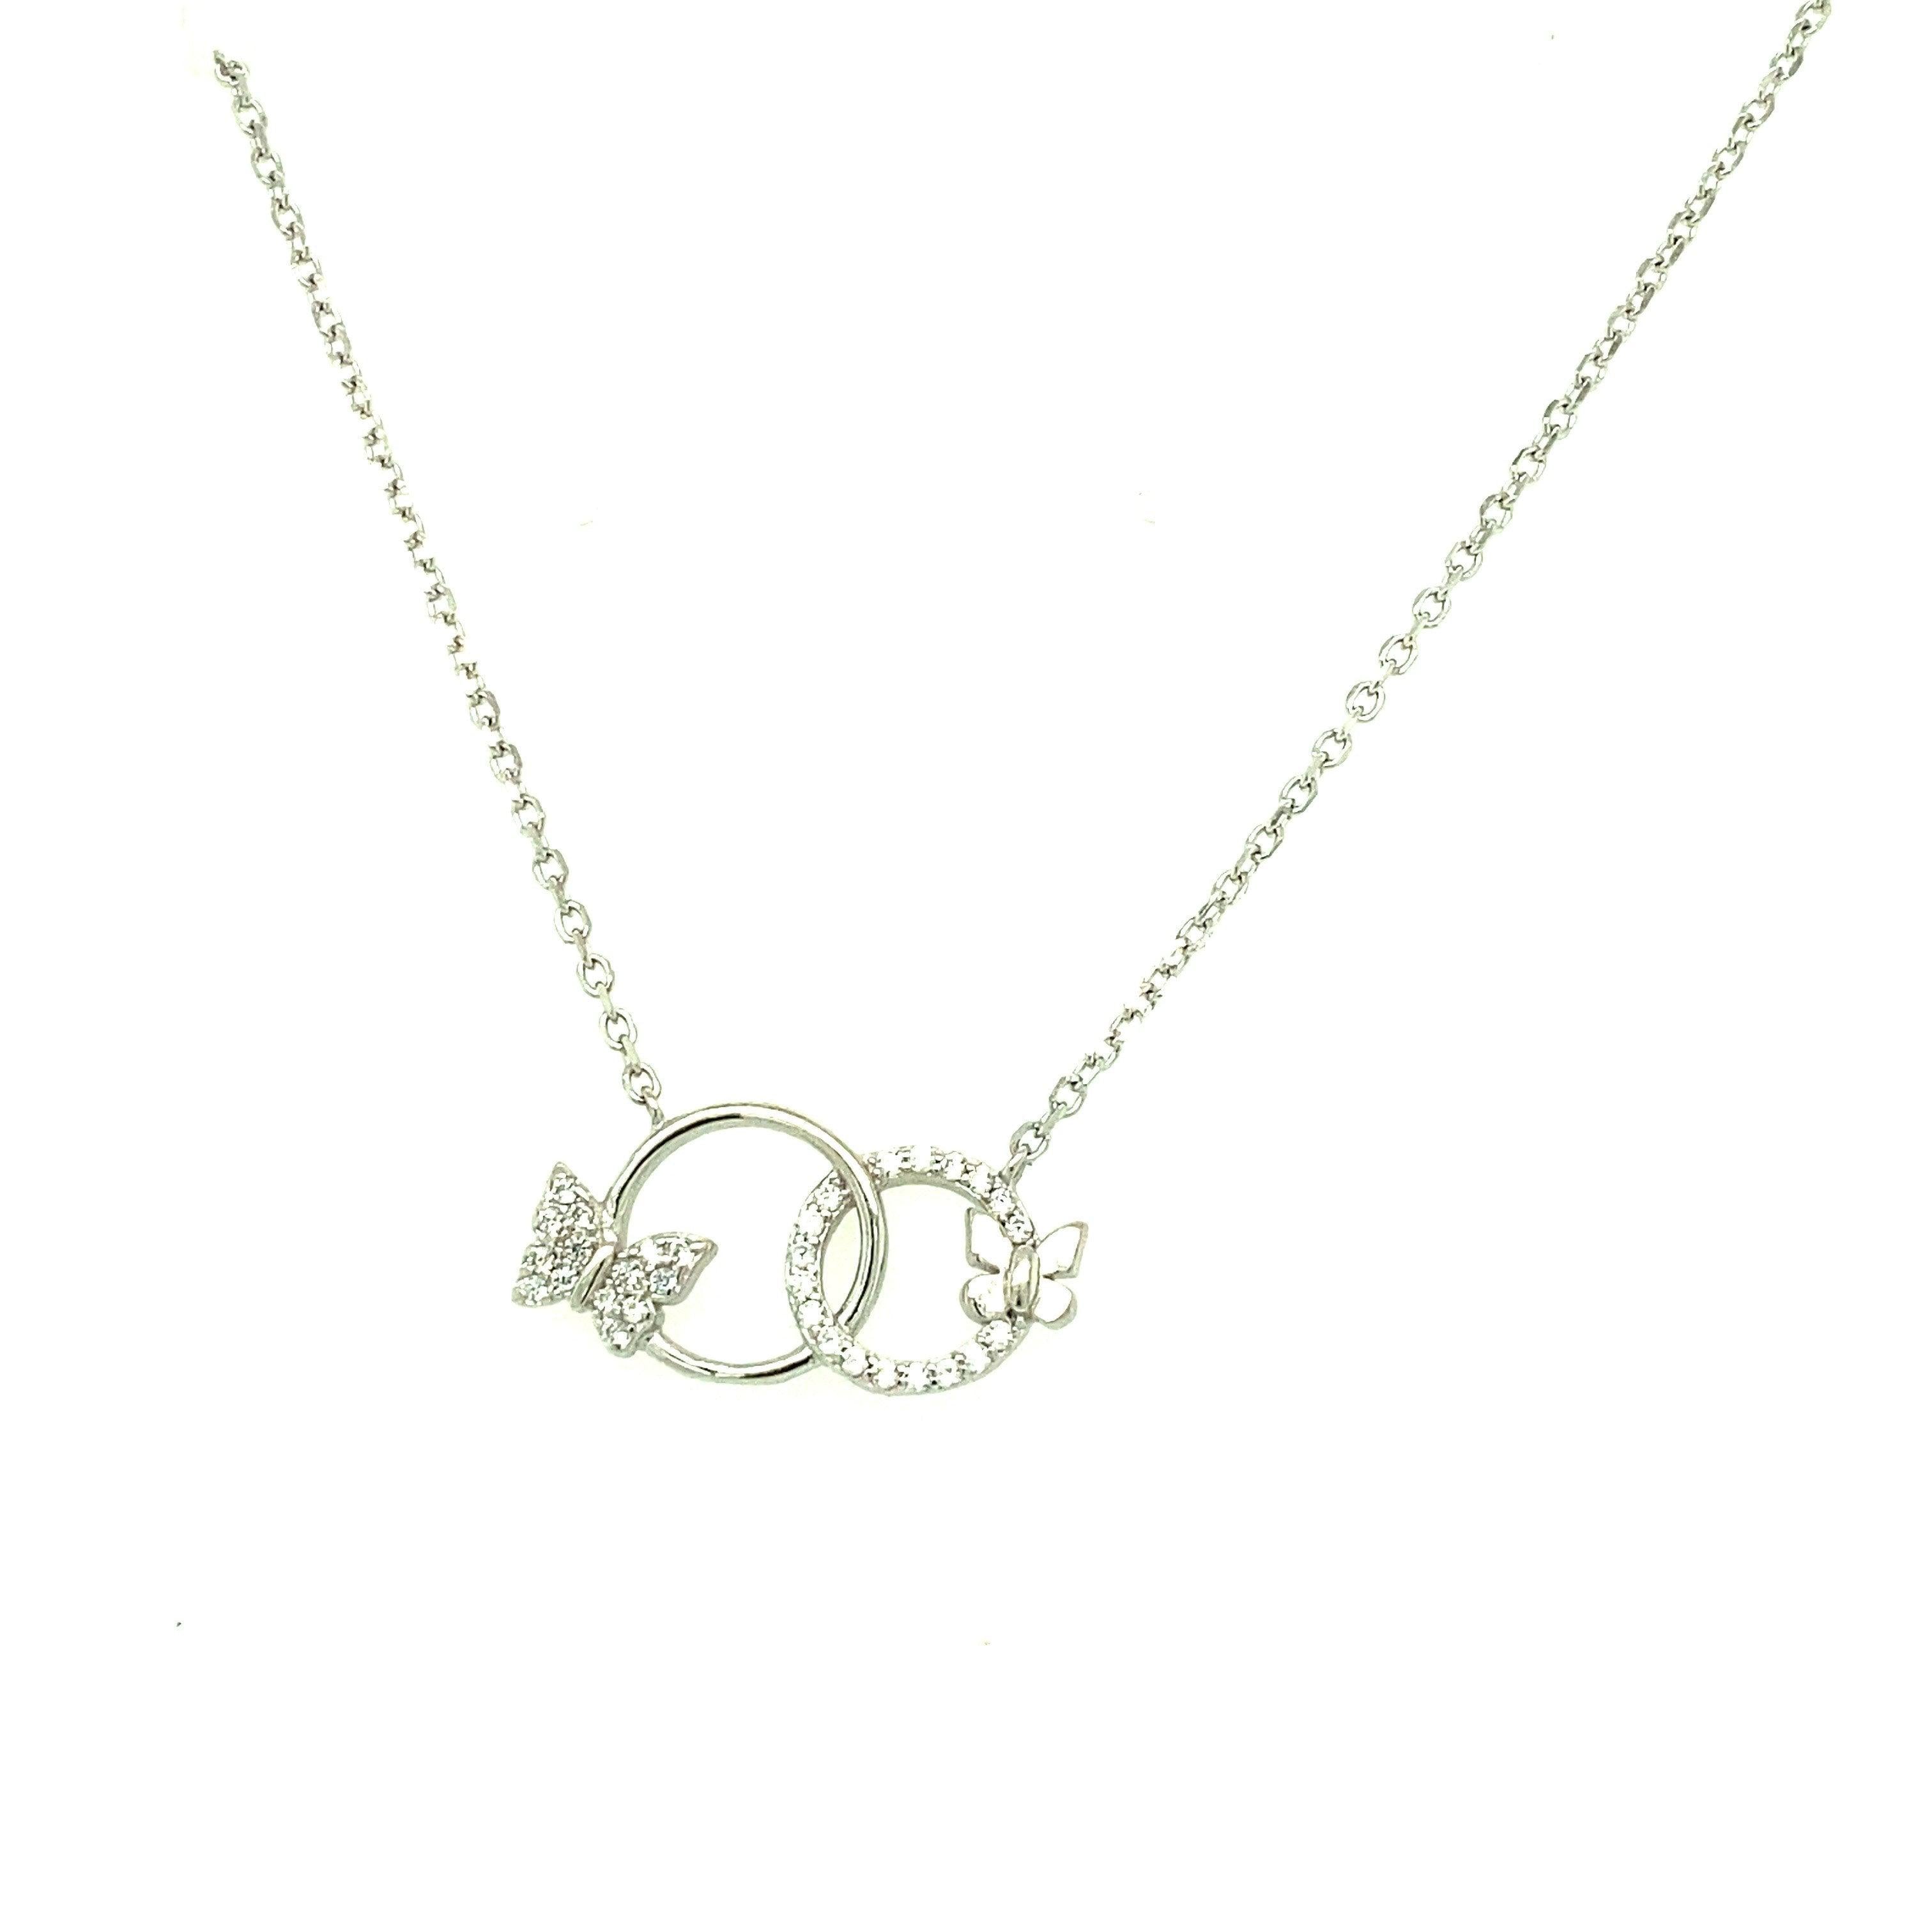 Necklace N1604 - 925 Sterling Silver - Asfour Crystal